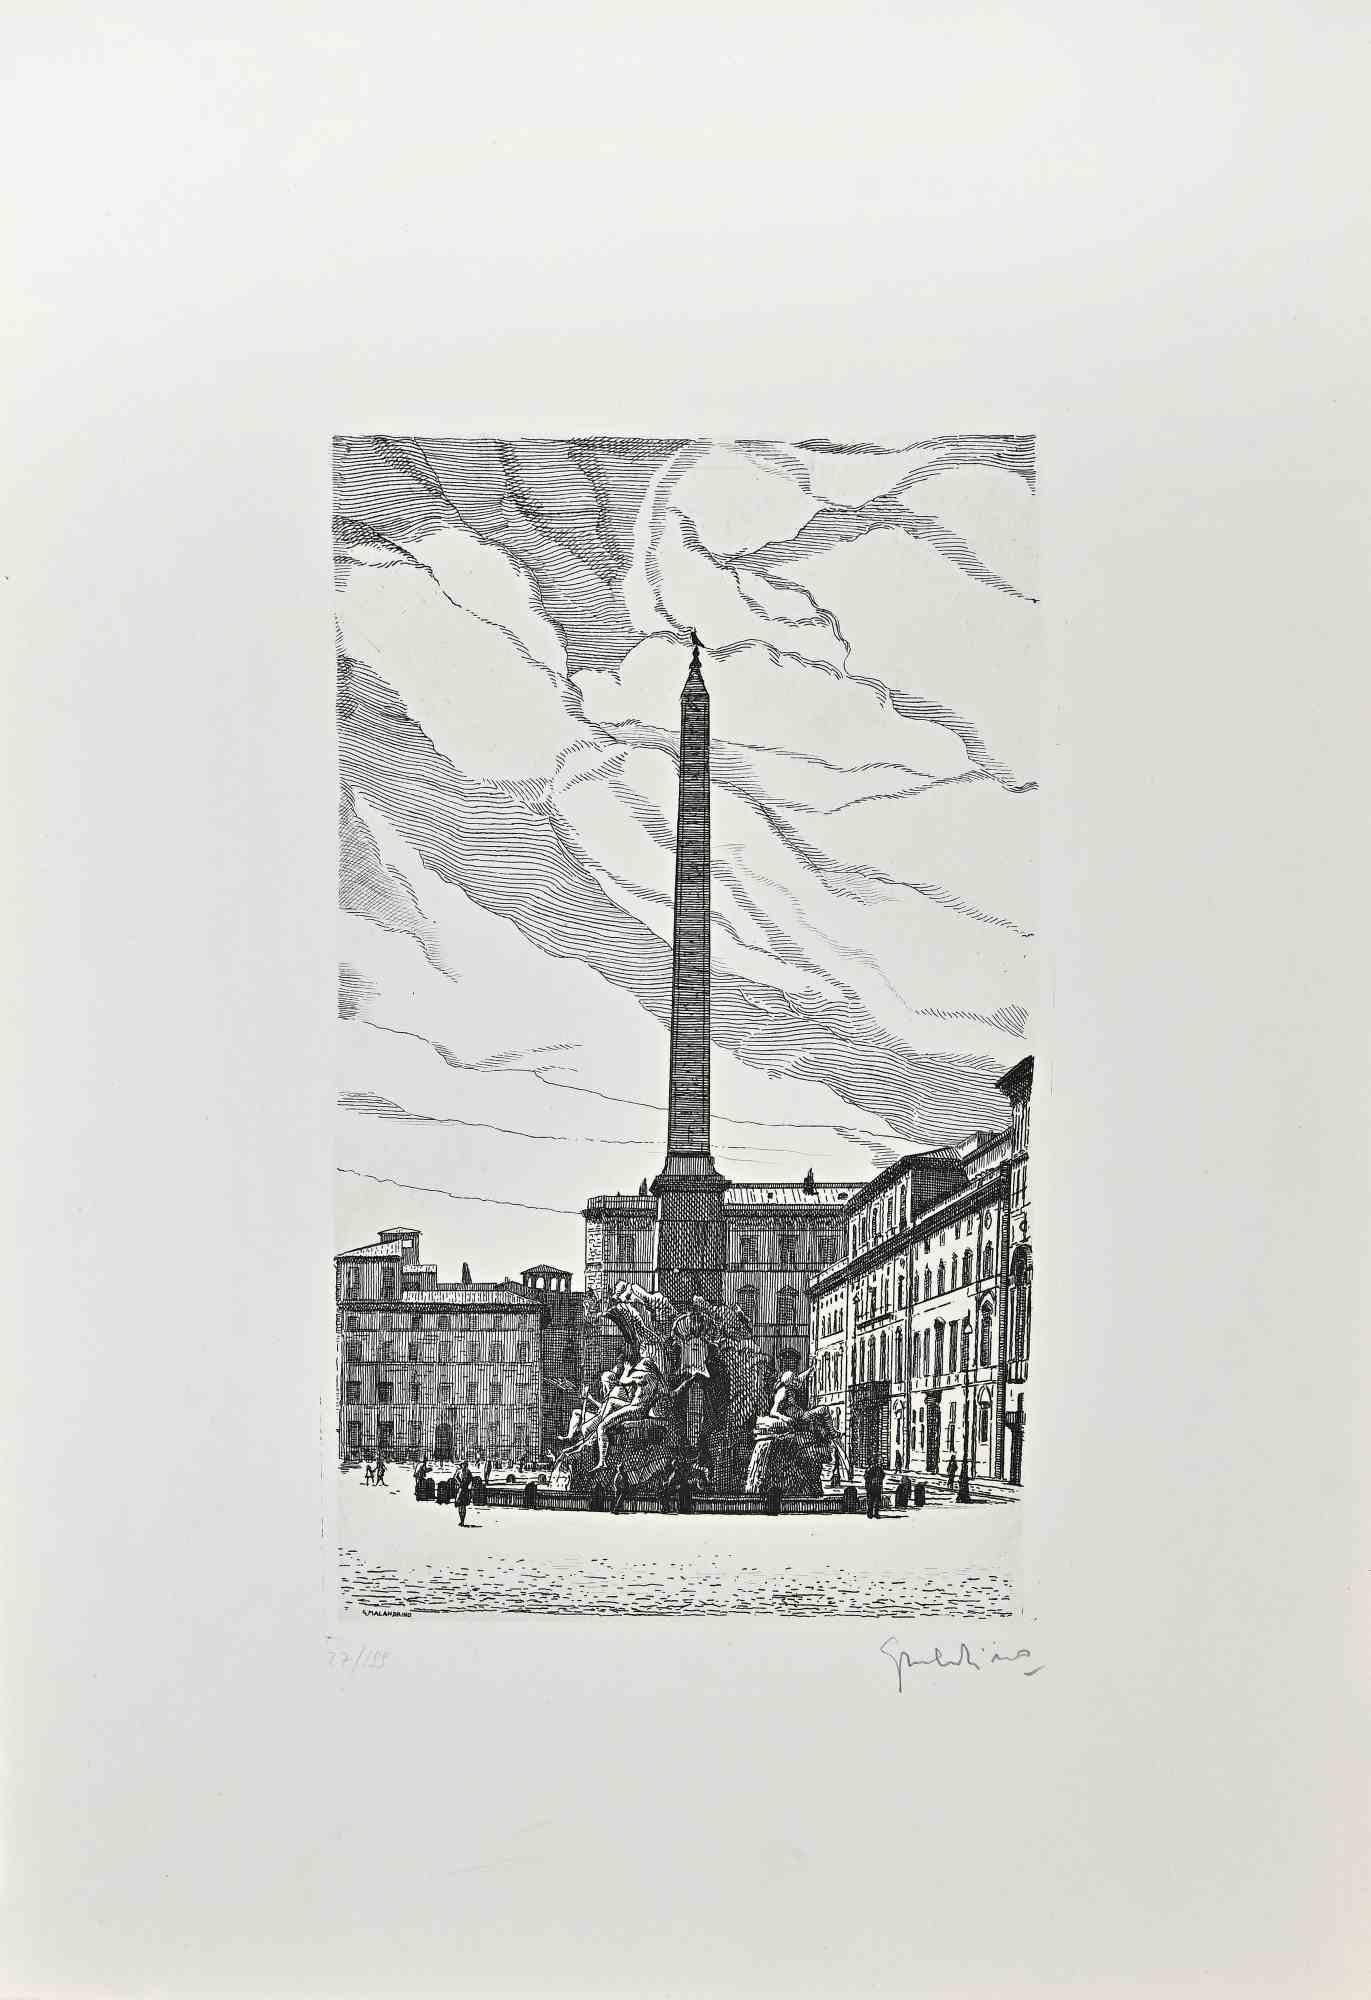 Fountain of the 4 Rivers in Navona Square is an artwork realized by Giuseppe Malandrino.

Print in etching technique.

Hand-signed by the artist in pencil on the lower right corner.

Numbered edition of 199 copies.

Good condition. 

This artwork